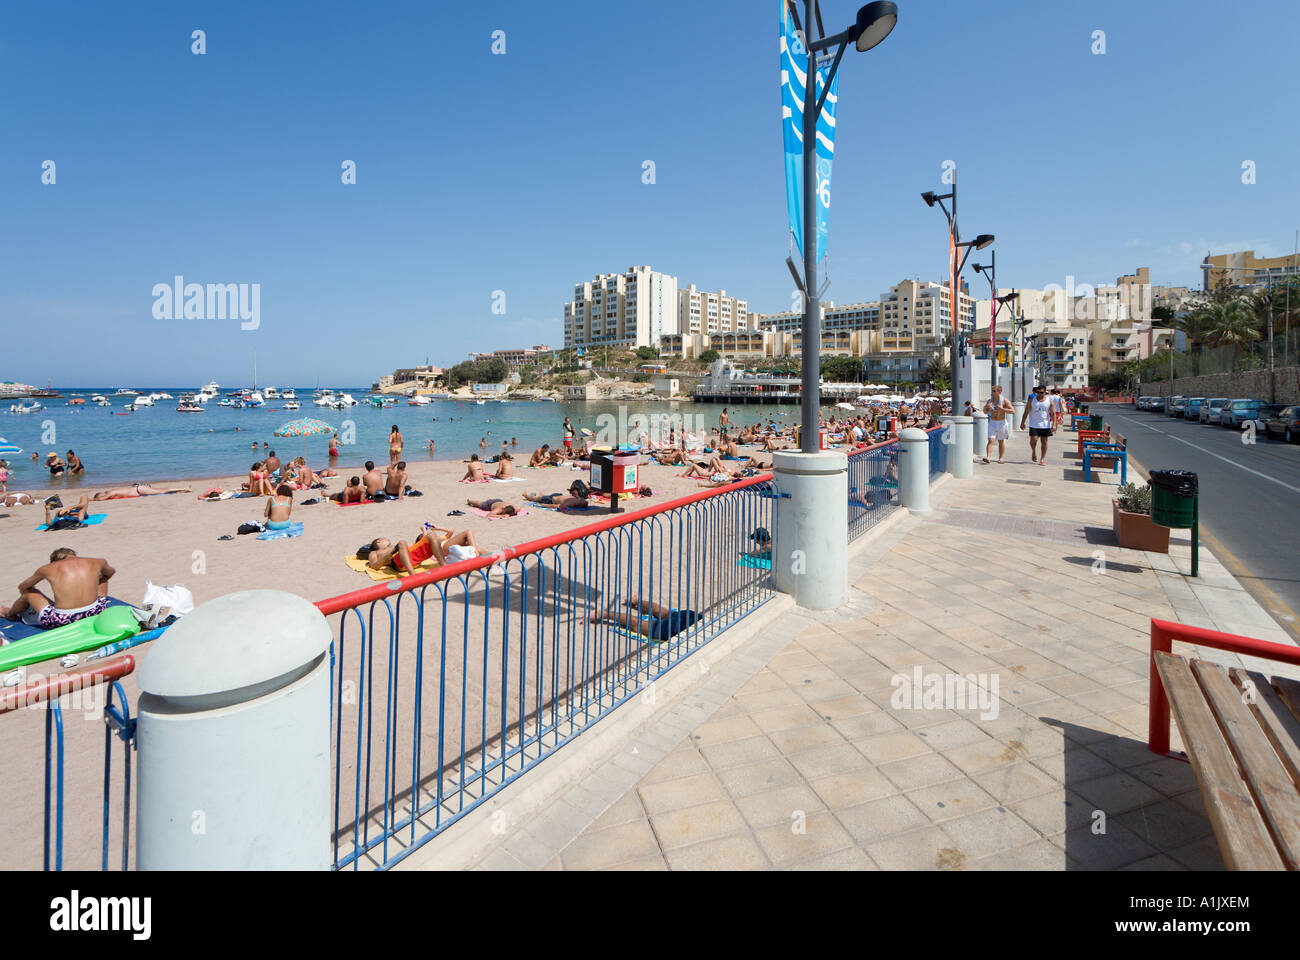 Beach and seafront promenade at St George's Bay, Malta Stock Photo